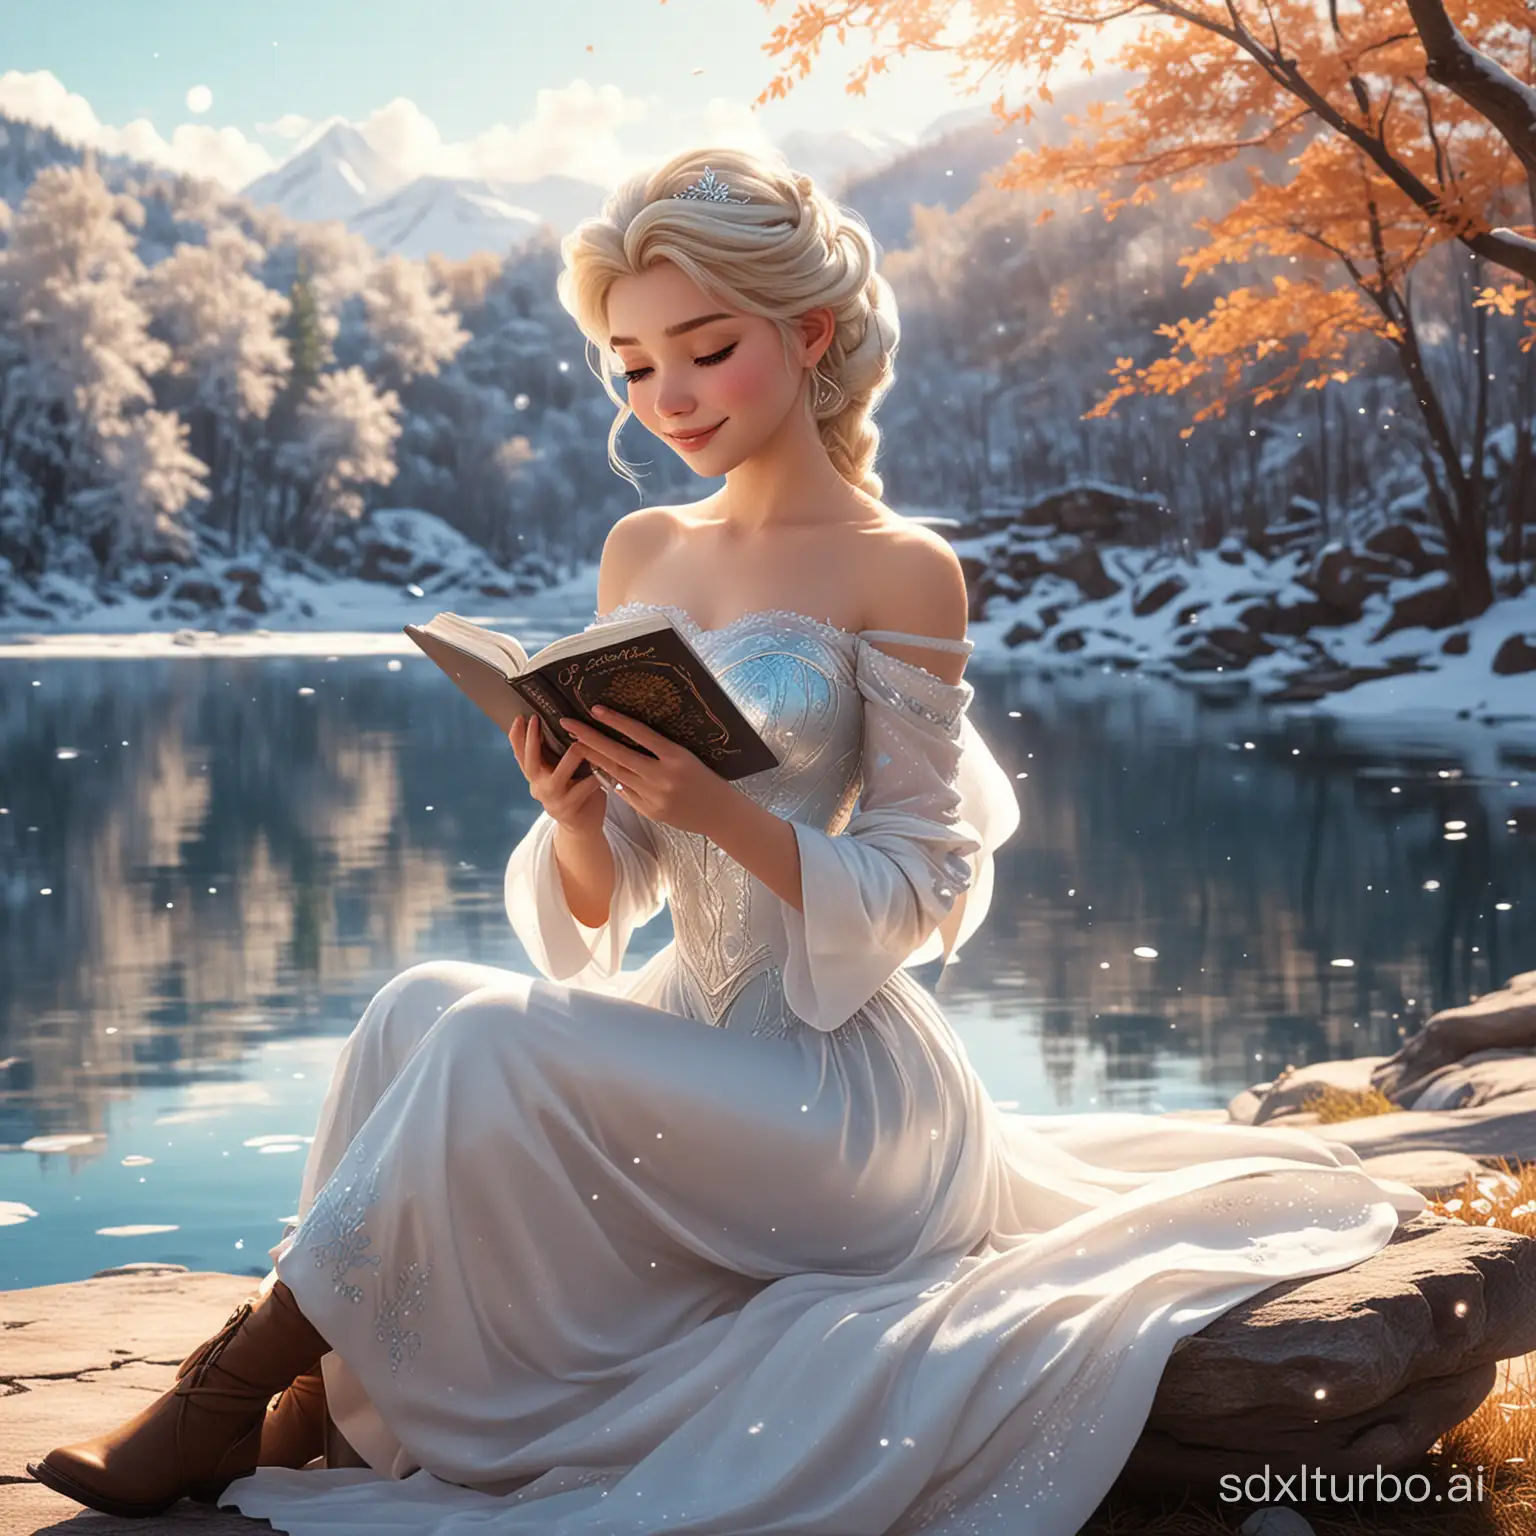 in the afternoon sunshine, beautiful princess elsawho had a romantic relationship with ice and snow,was sitting beside lake and reading a book ,lookingat her phone screen with a sweet smile. she enjoyedeisurely time, carefree, as if the whole world hadmelted in her smile, ull body, bold characterdesigns,warm tones,in the style of meticulousdesign, amime art